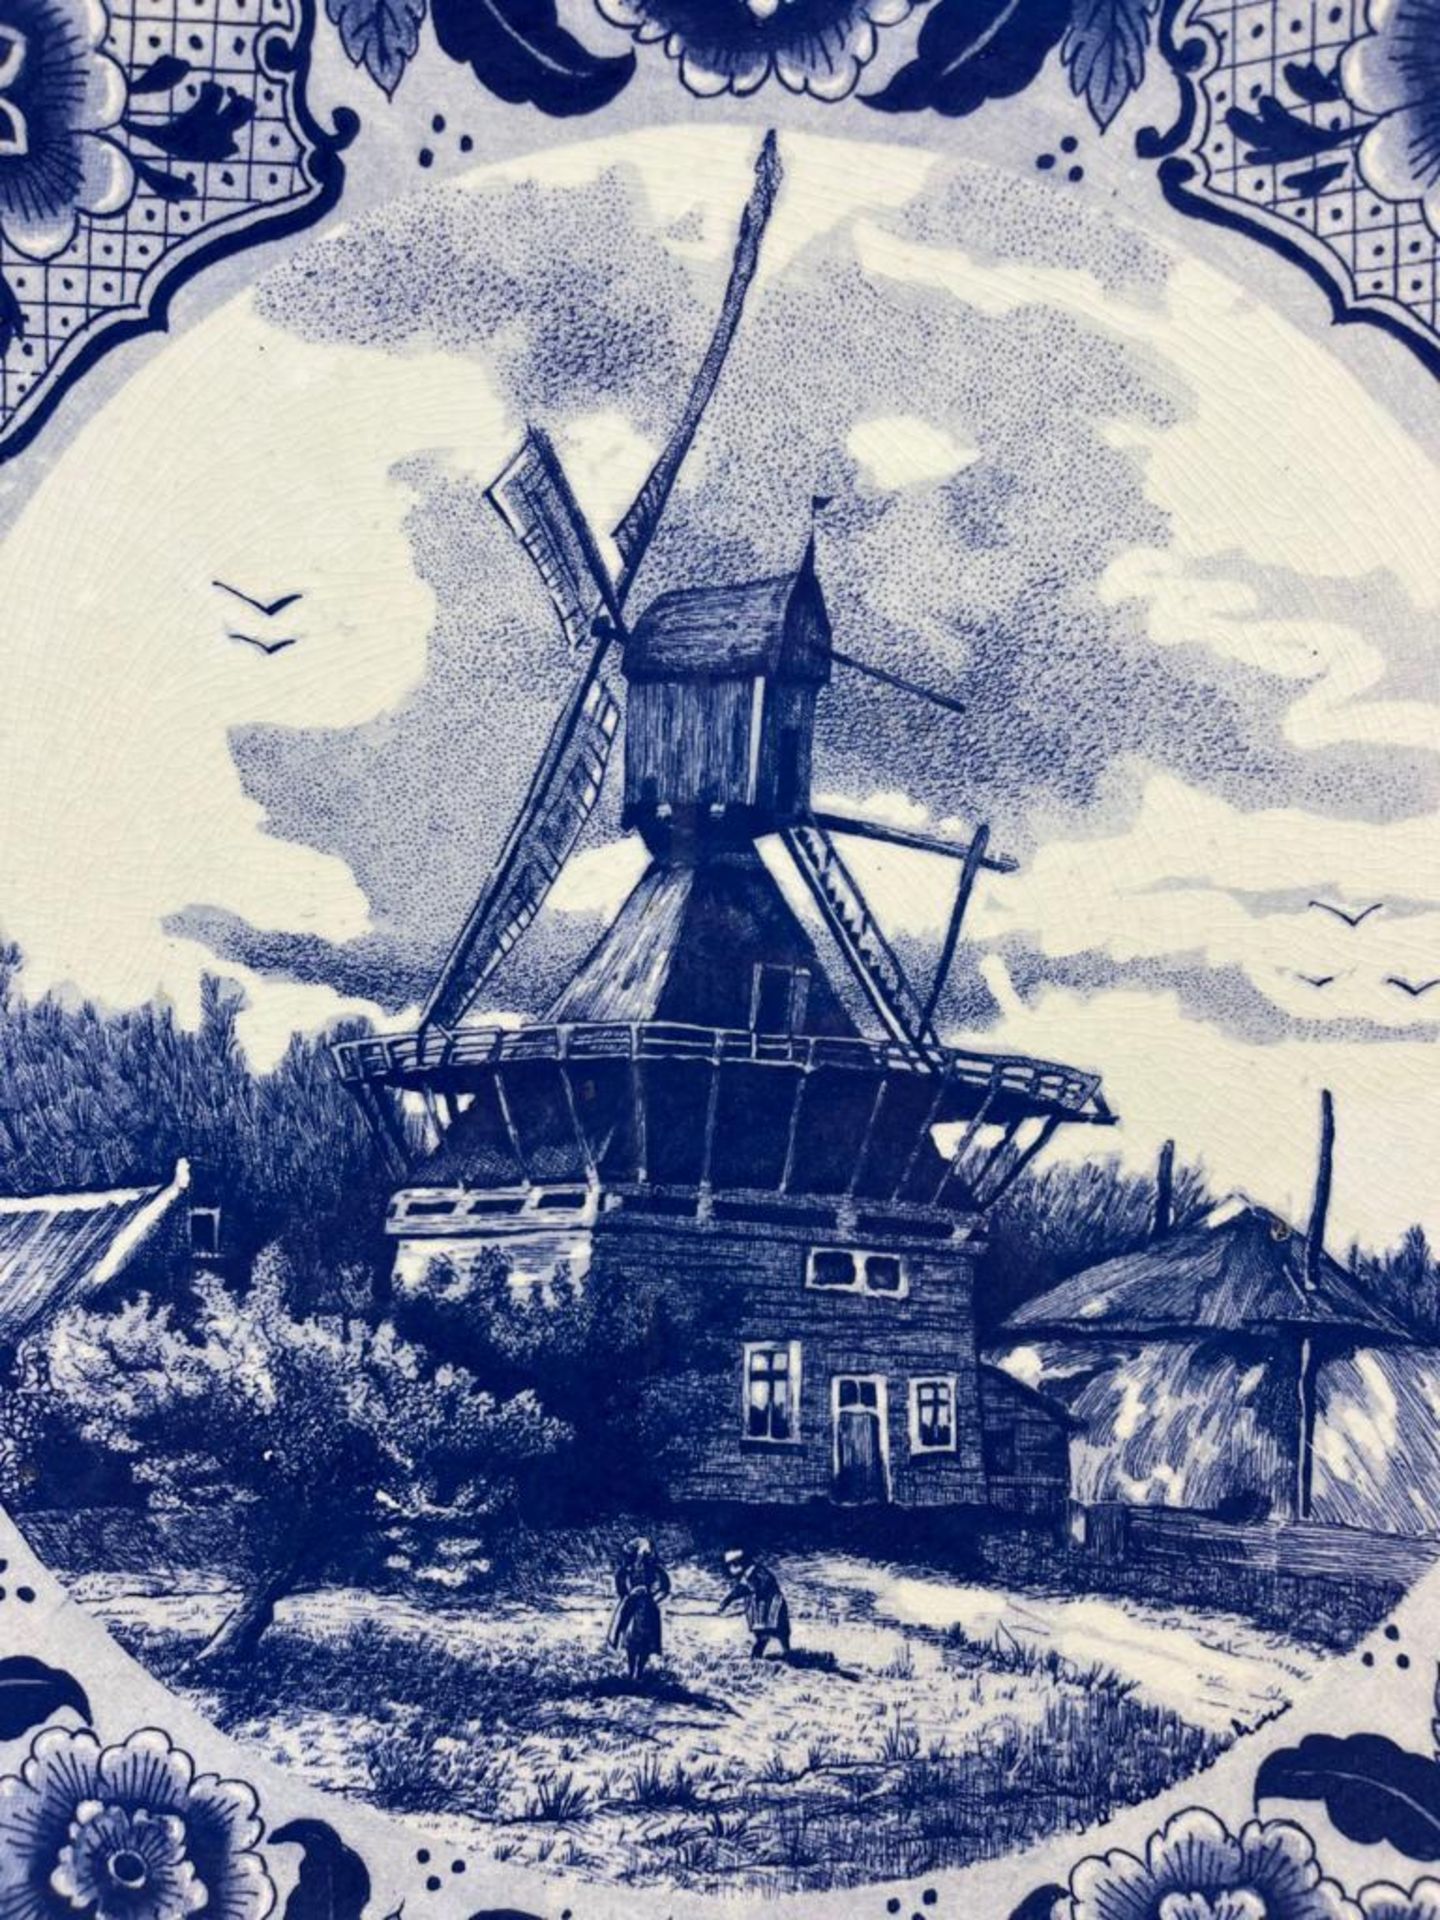 A LARGE DELFT BLUE DUTCH BLUE AND WHITE POTTERY CHARGER WITH WINDMILL DESIGN, DIAMETER 38CM - Image 2 of 5